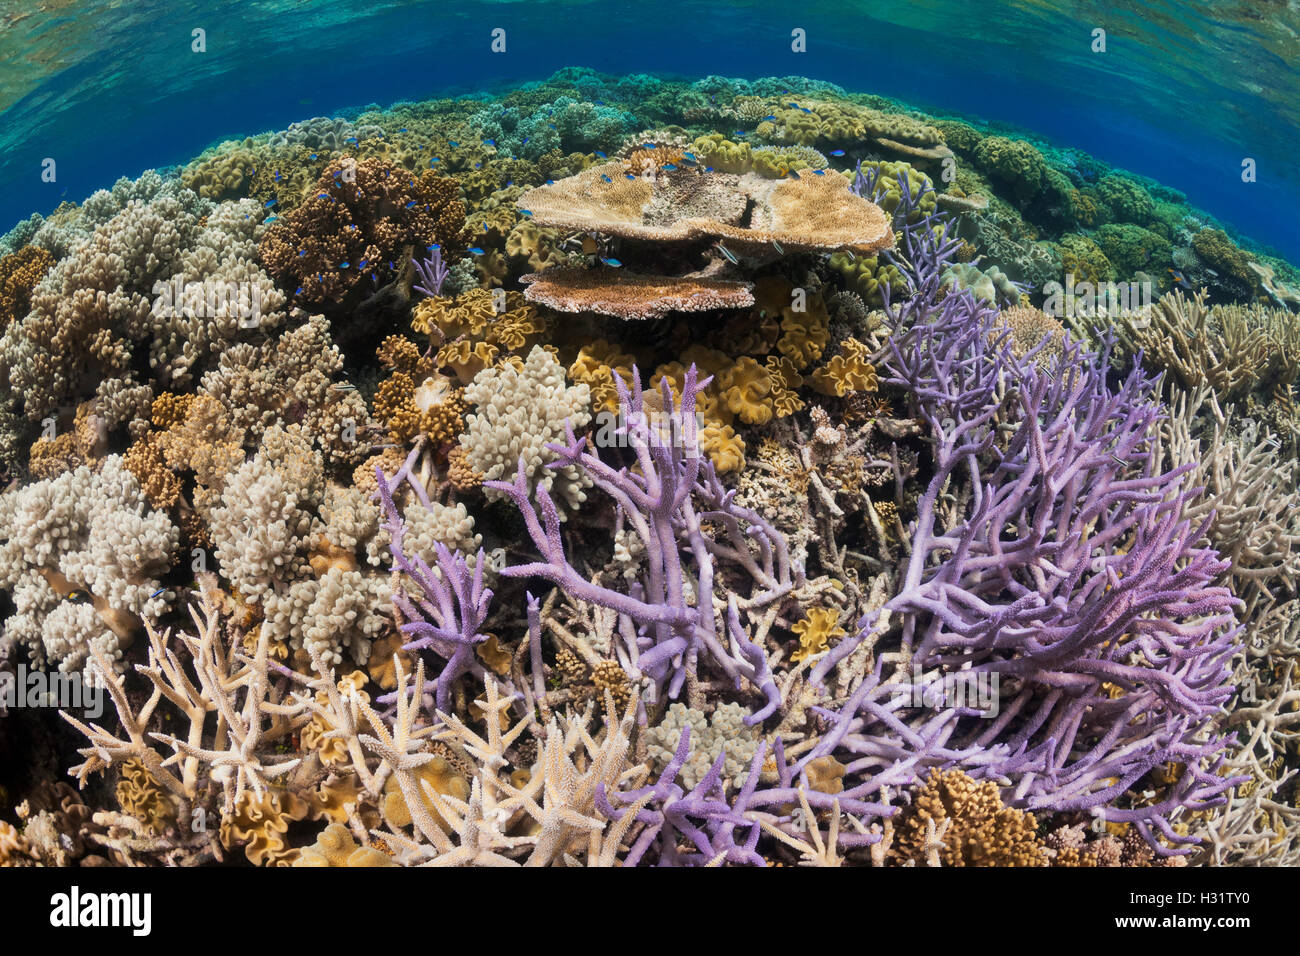 QZ0756-D. hard and soft corals on a healthy coral reef in the Great Barrier Reef Marine Park. Australia, Great Barrier Reef, Pac Stock Photo